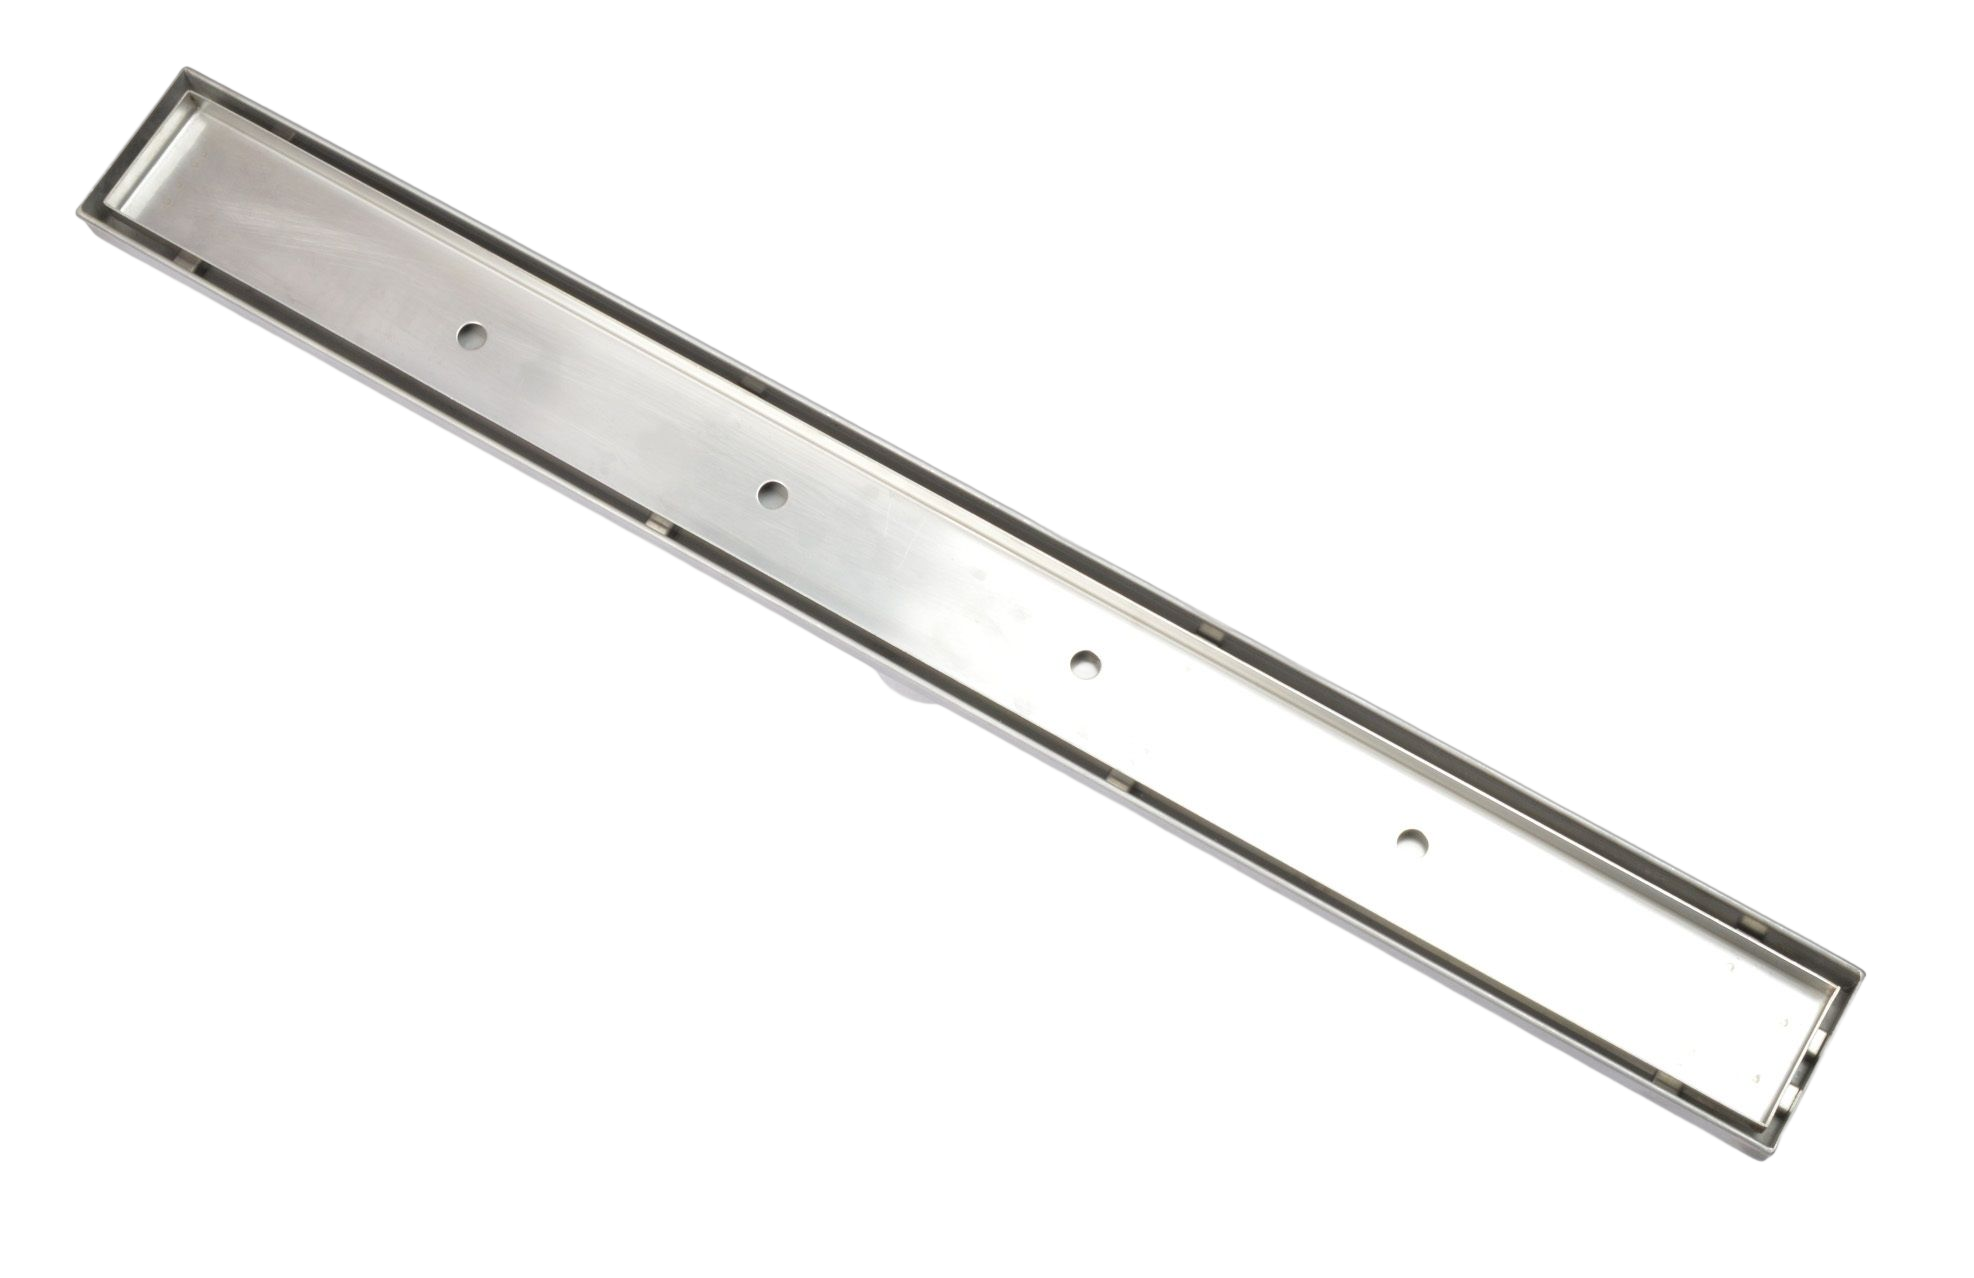 POSEIDON TIFD FLOOR GRATE OUTLET 80MM CHROME 600MM, 800MM, 900MM, 1000MM AND 1200MM